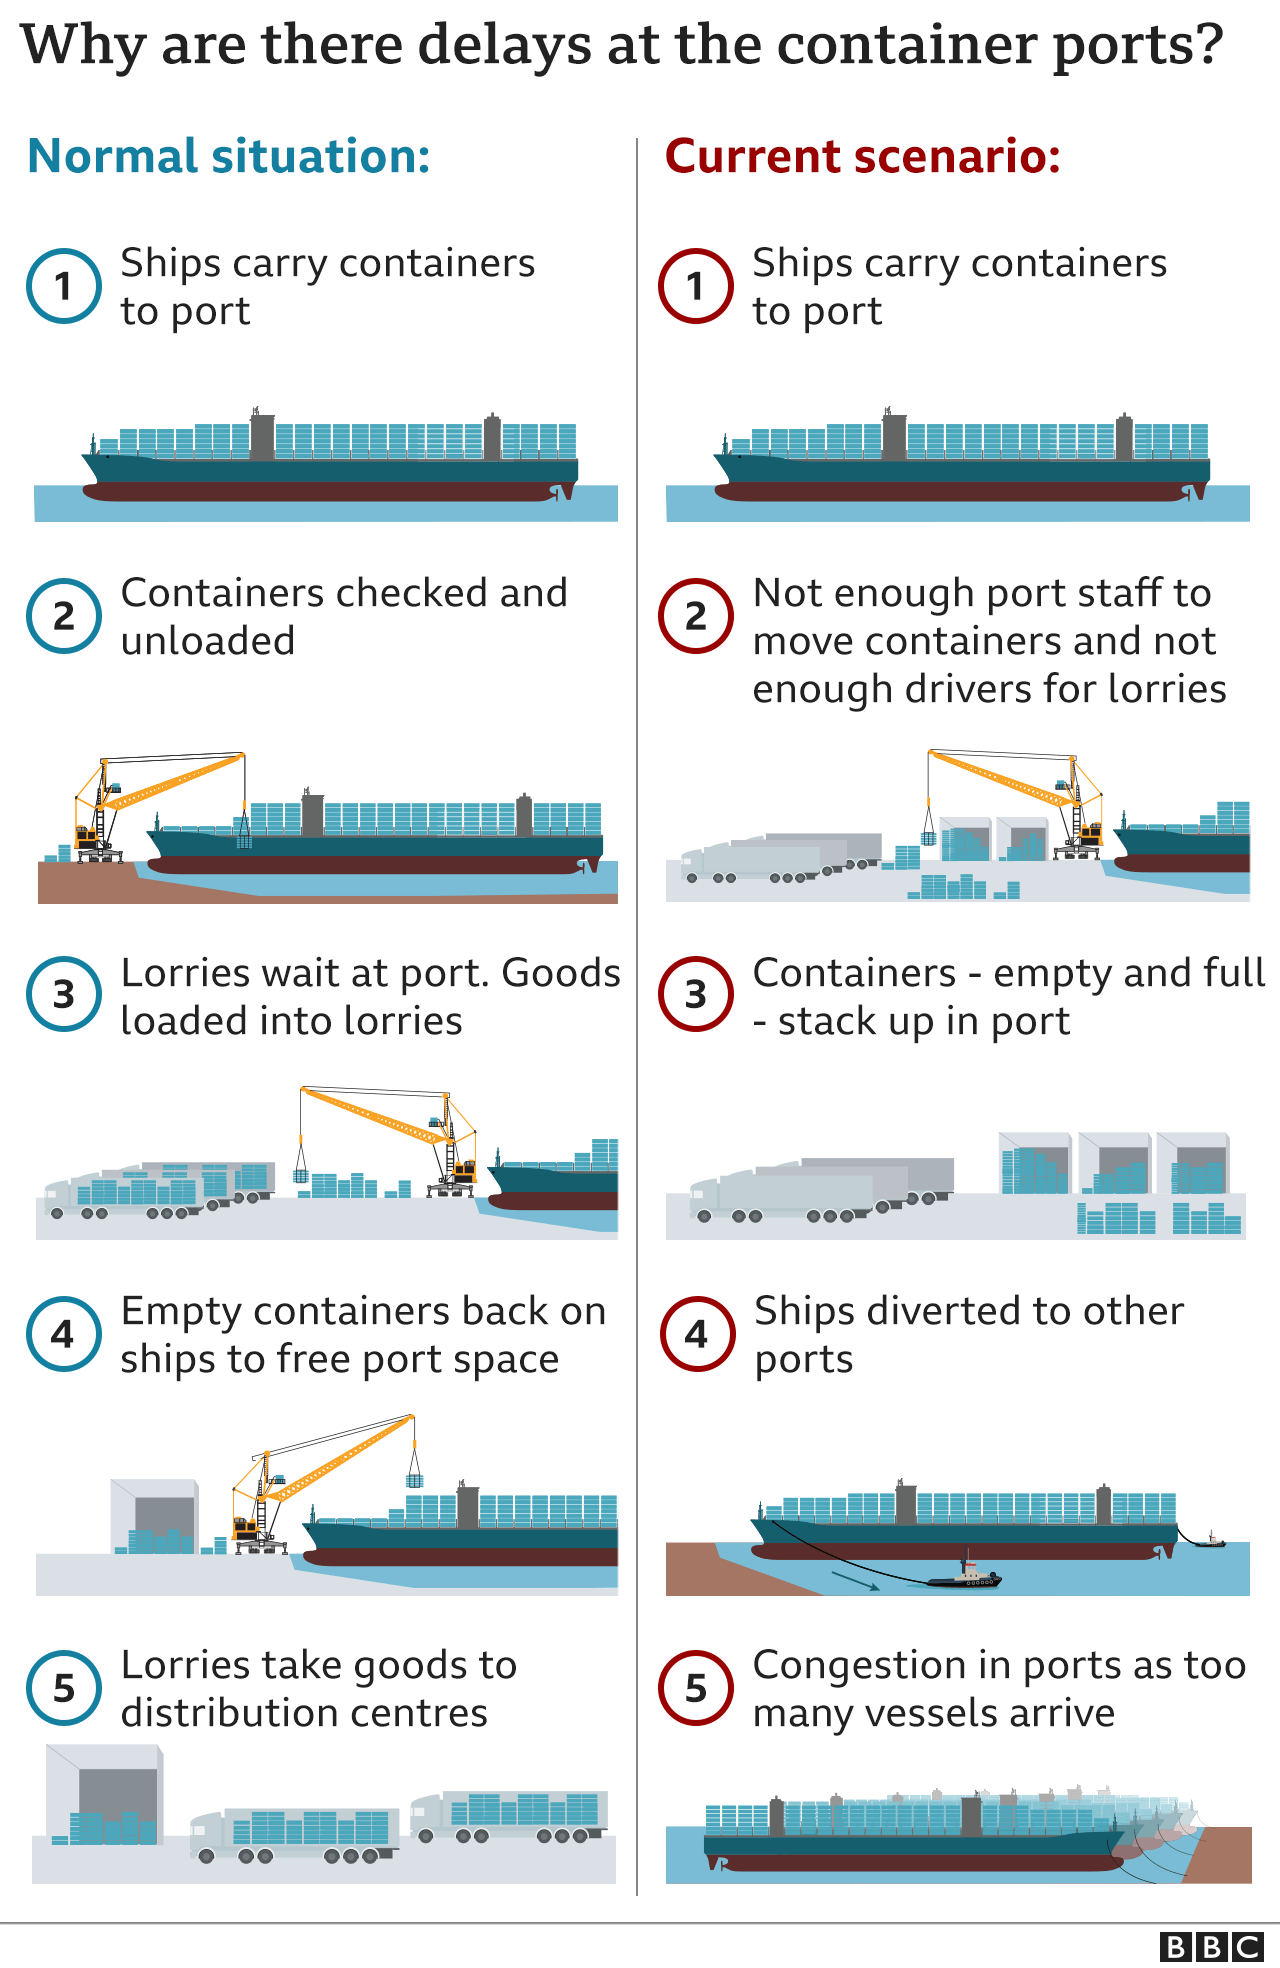 Shipping Container Rates Down 63%, But We're a Long Way From Back to Normal  Operations